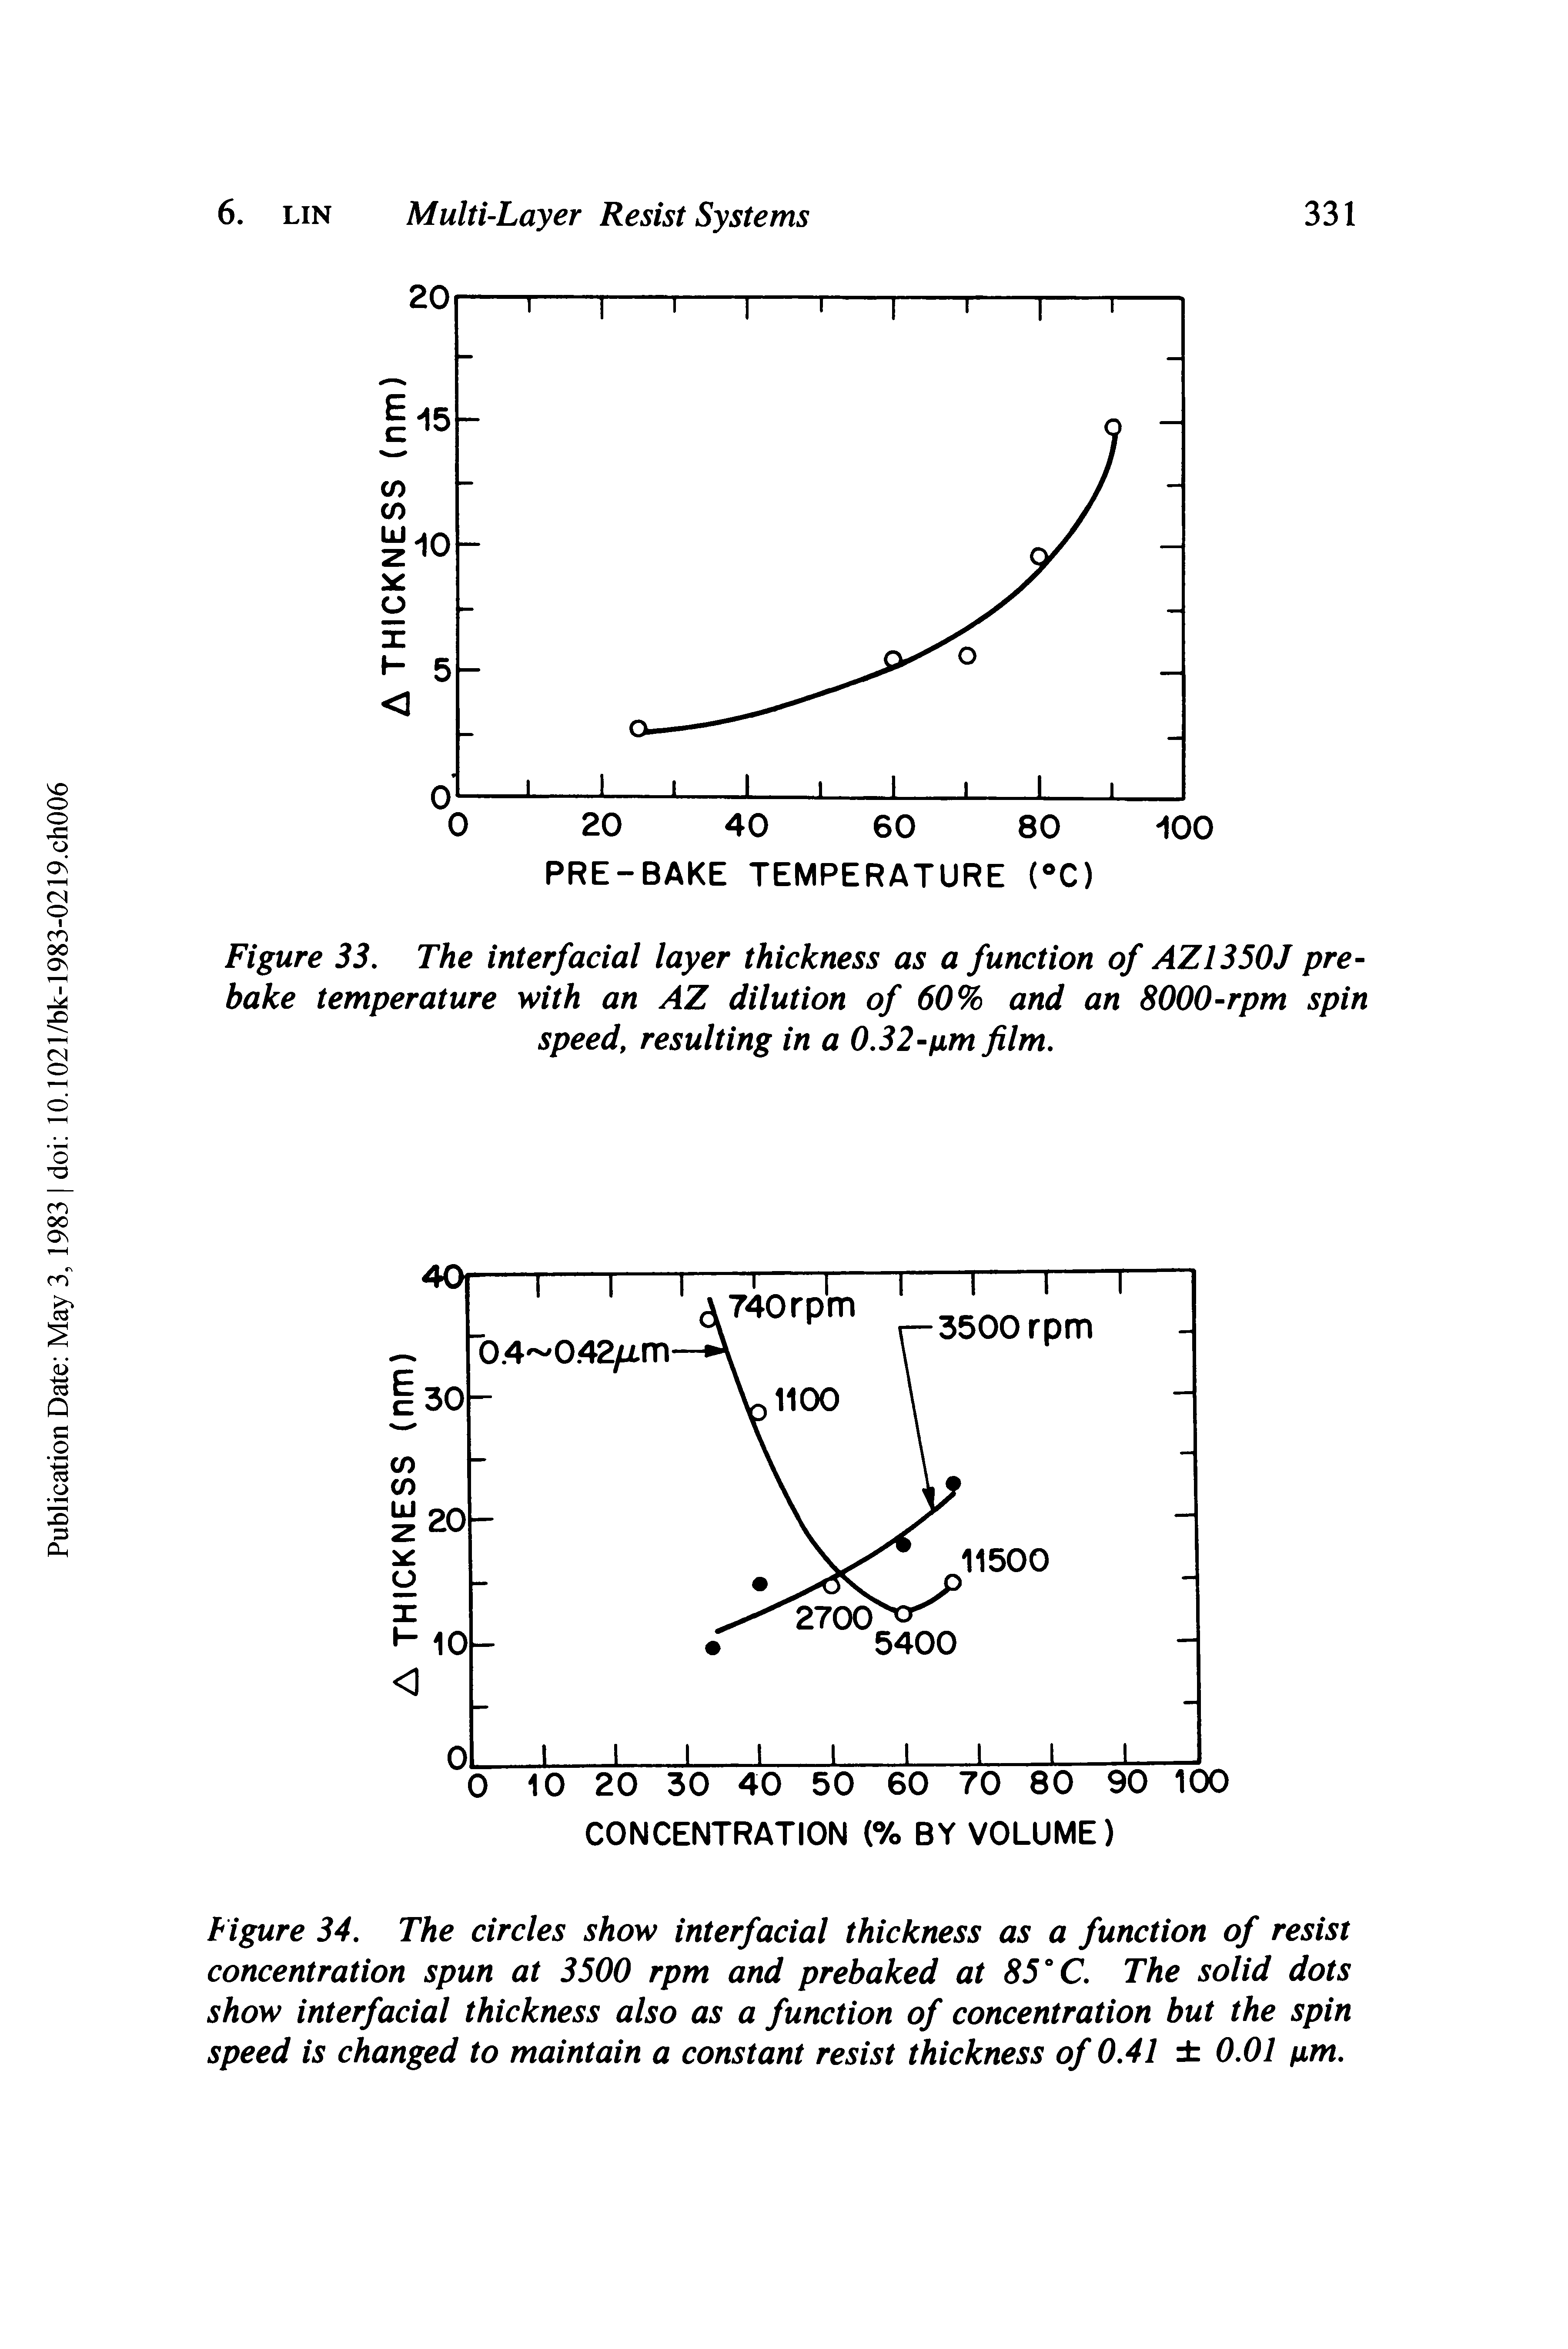 Figure 34. The circles show interfacial thickness as a function of resist concentration spun at 3500 rpm and prebaked at 55 C The solid dots show interfacial thickness also as a function of concentration but the spin speed is changed to maintain a constant resist thickness of 0.41 0.01 pm.